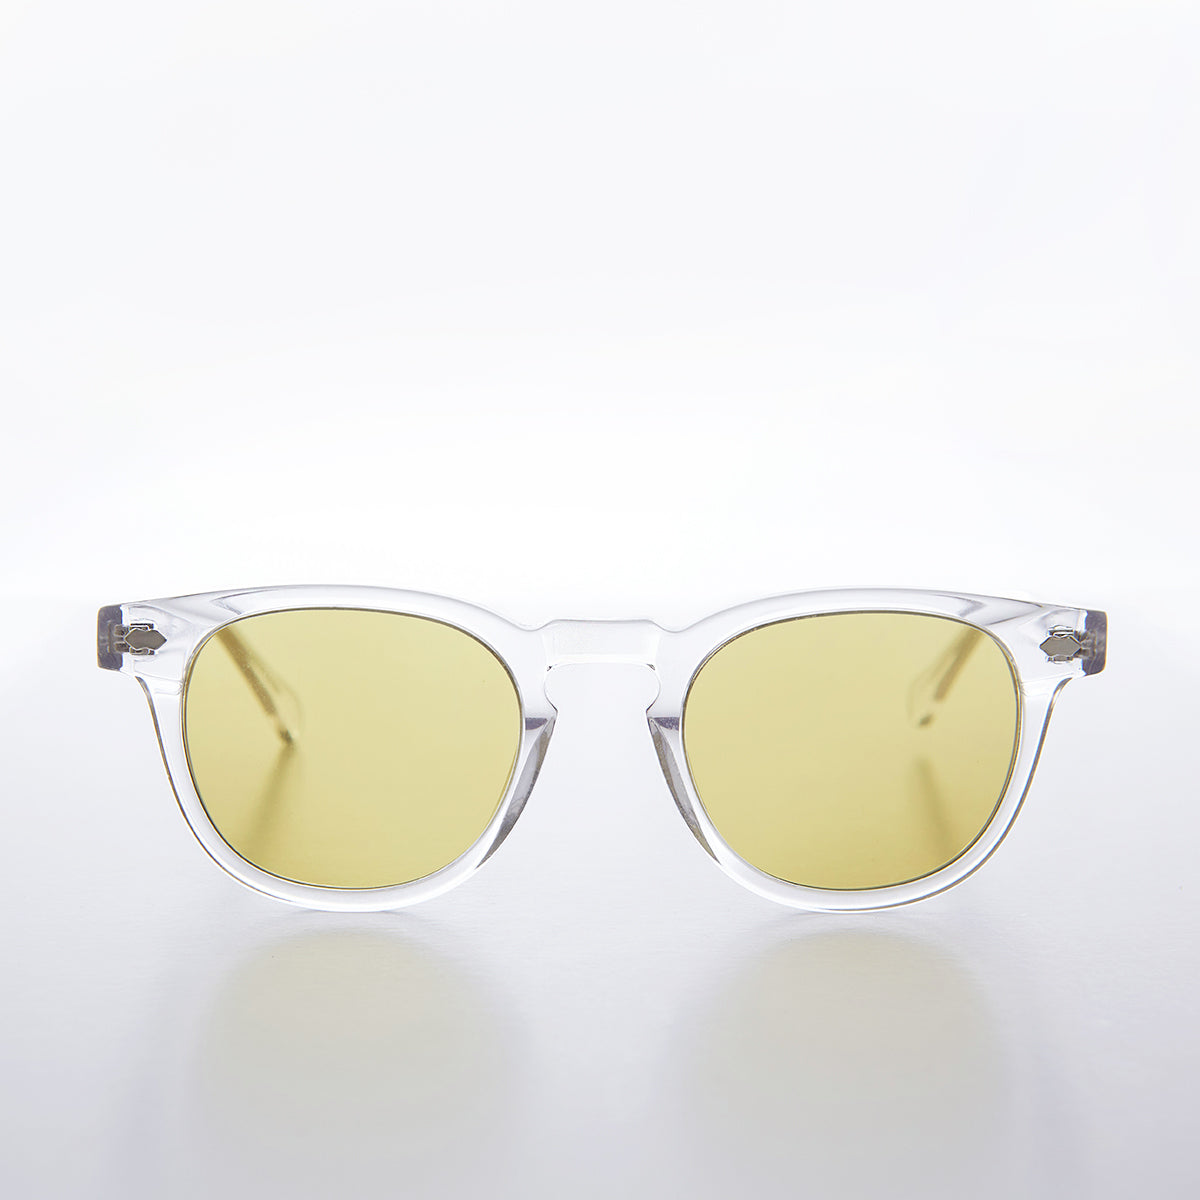 Clear Acetate Square Sunglass with Yellow Lens